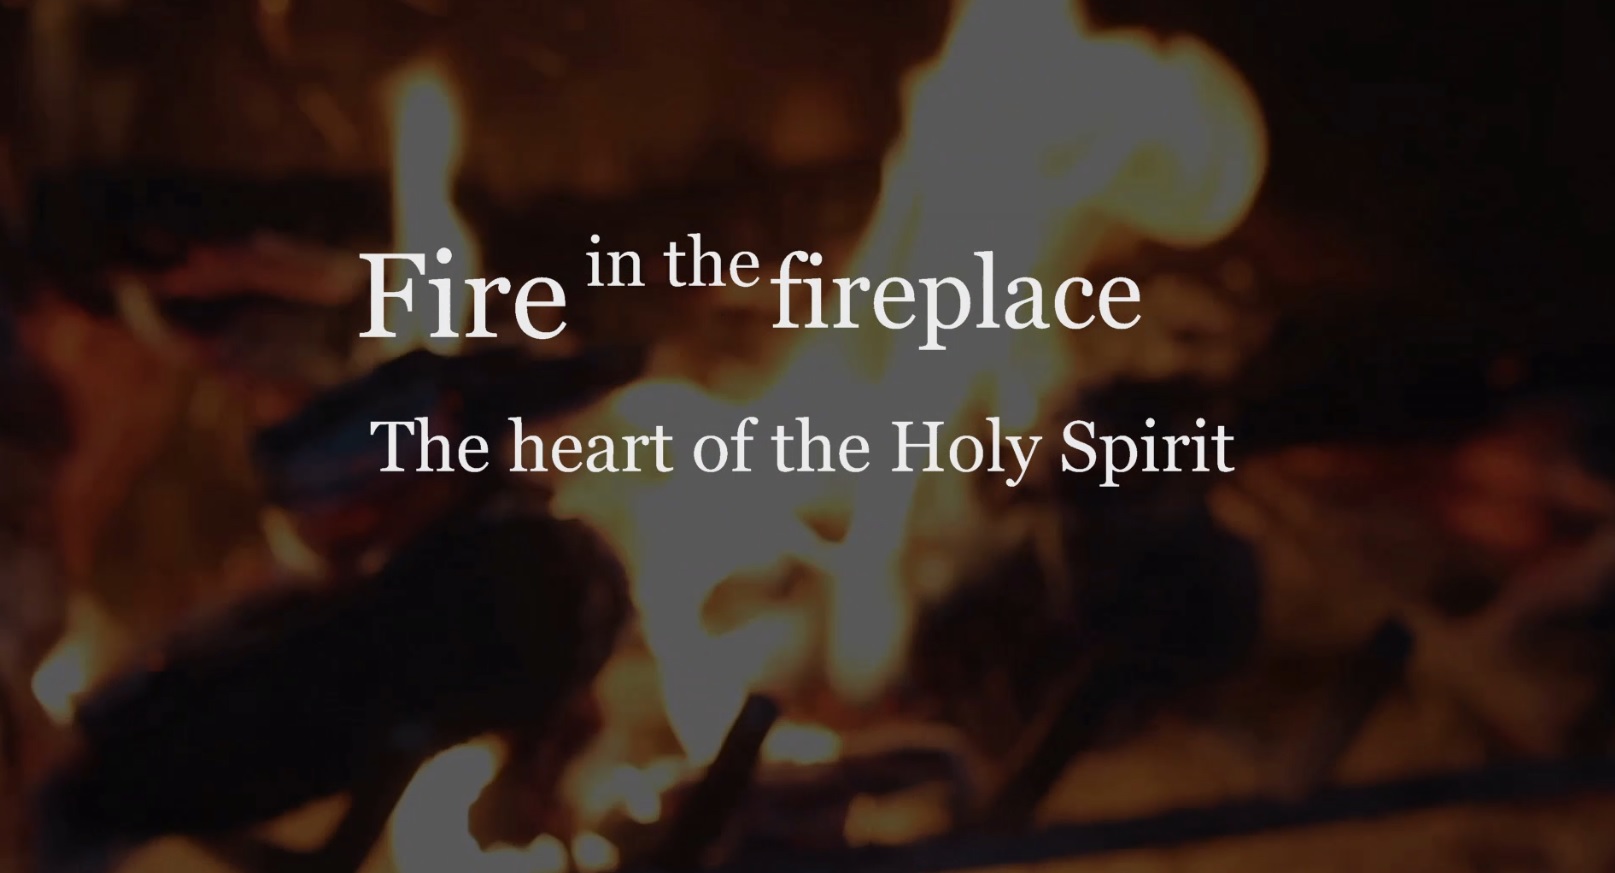 Fire in the Fireplace: the Heart of the Holy Spirit